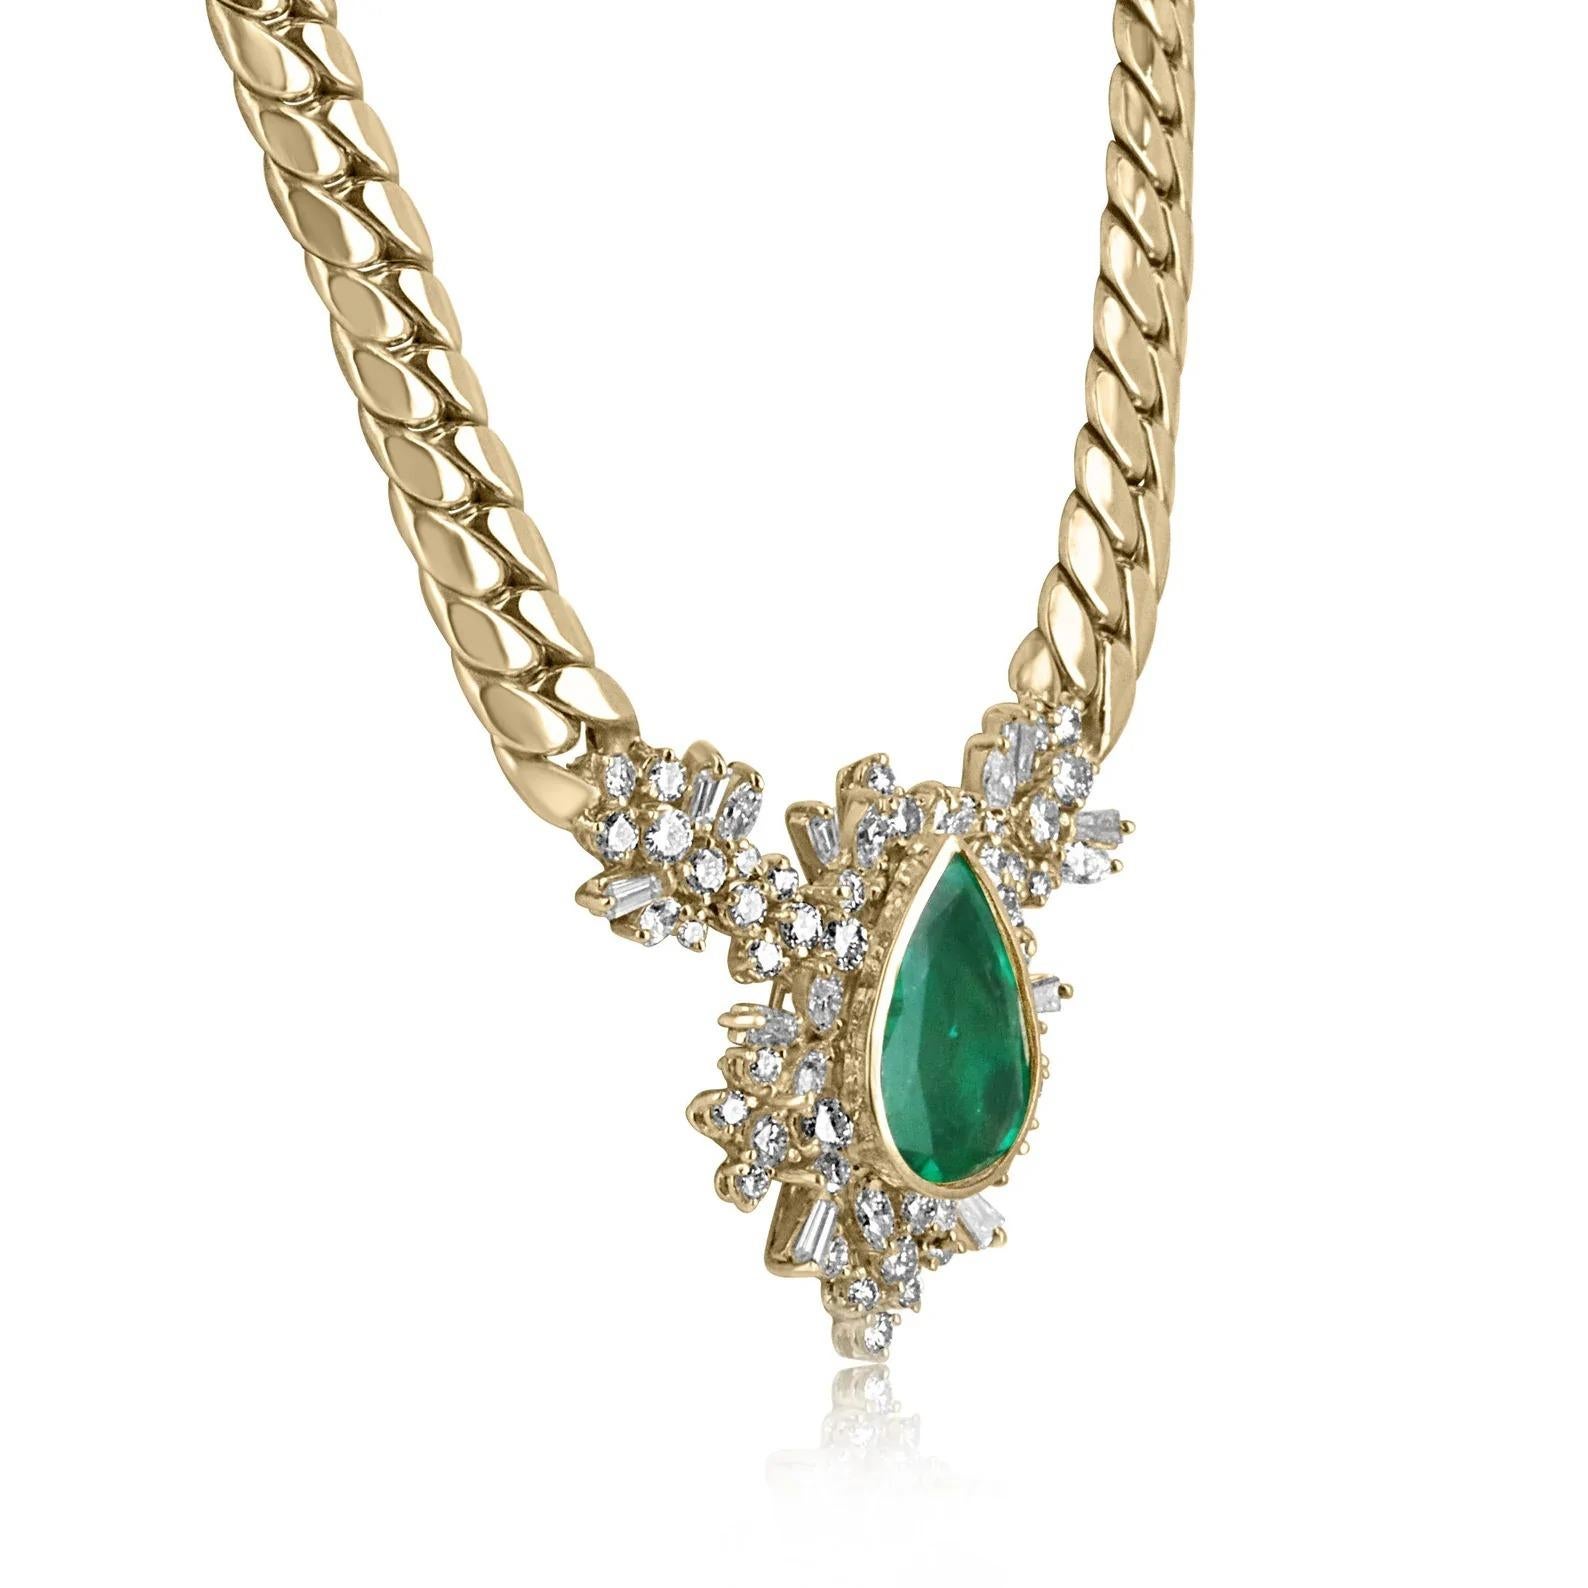 Displayed is an extraordinary and large Muzo green Colombian emerald and diamond statement necklace. A substantial, earth-mined emerald weighs 9.90 carats and is bezel set in sleek, 18K gold. A crown of brilliant round, marquise, and tapered